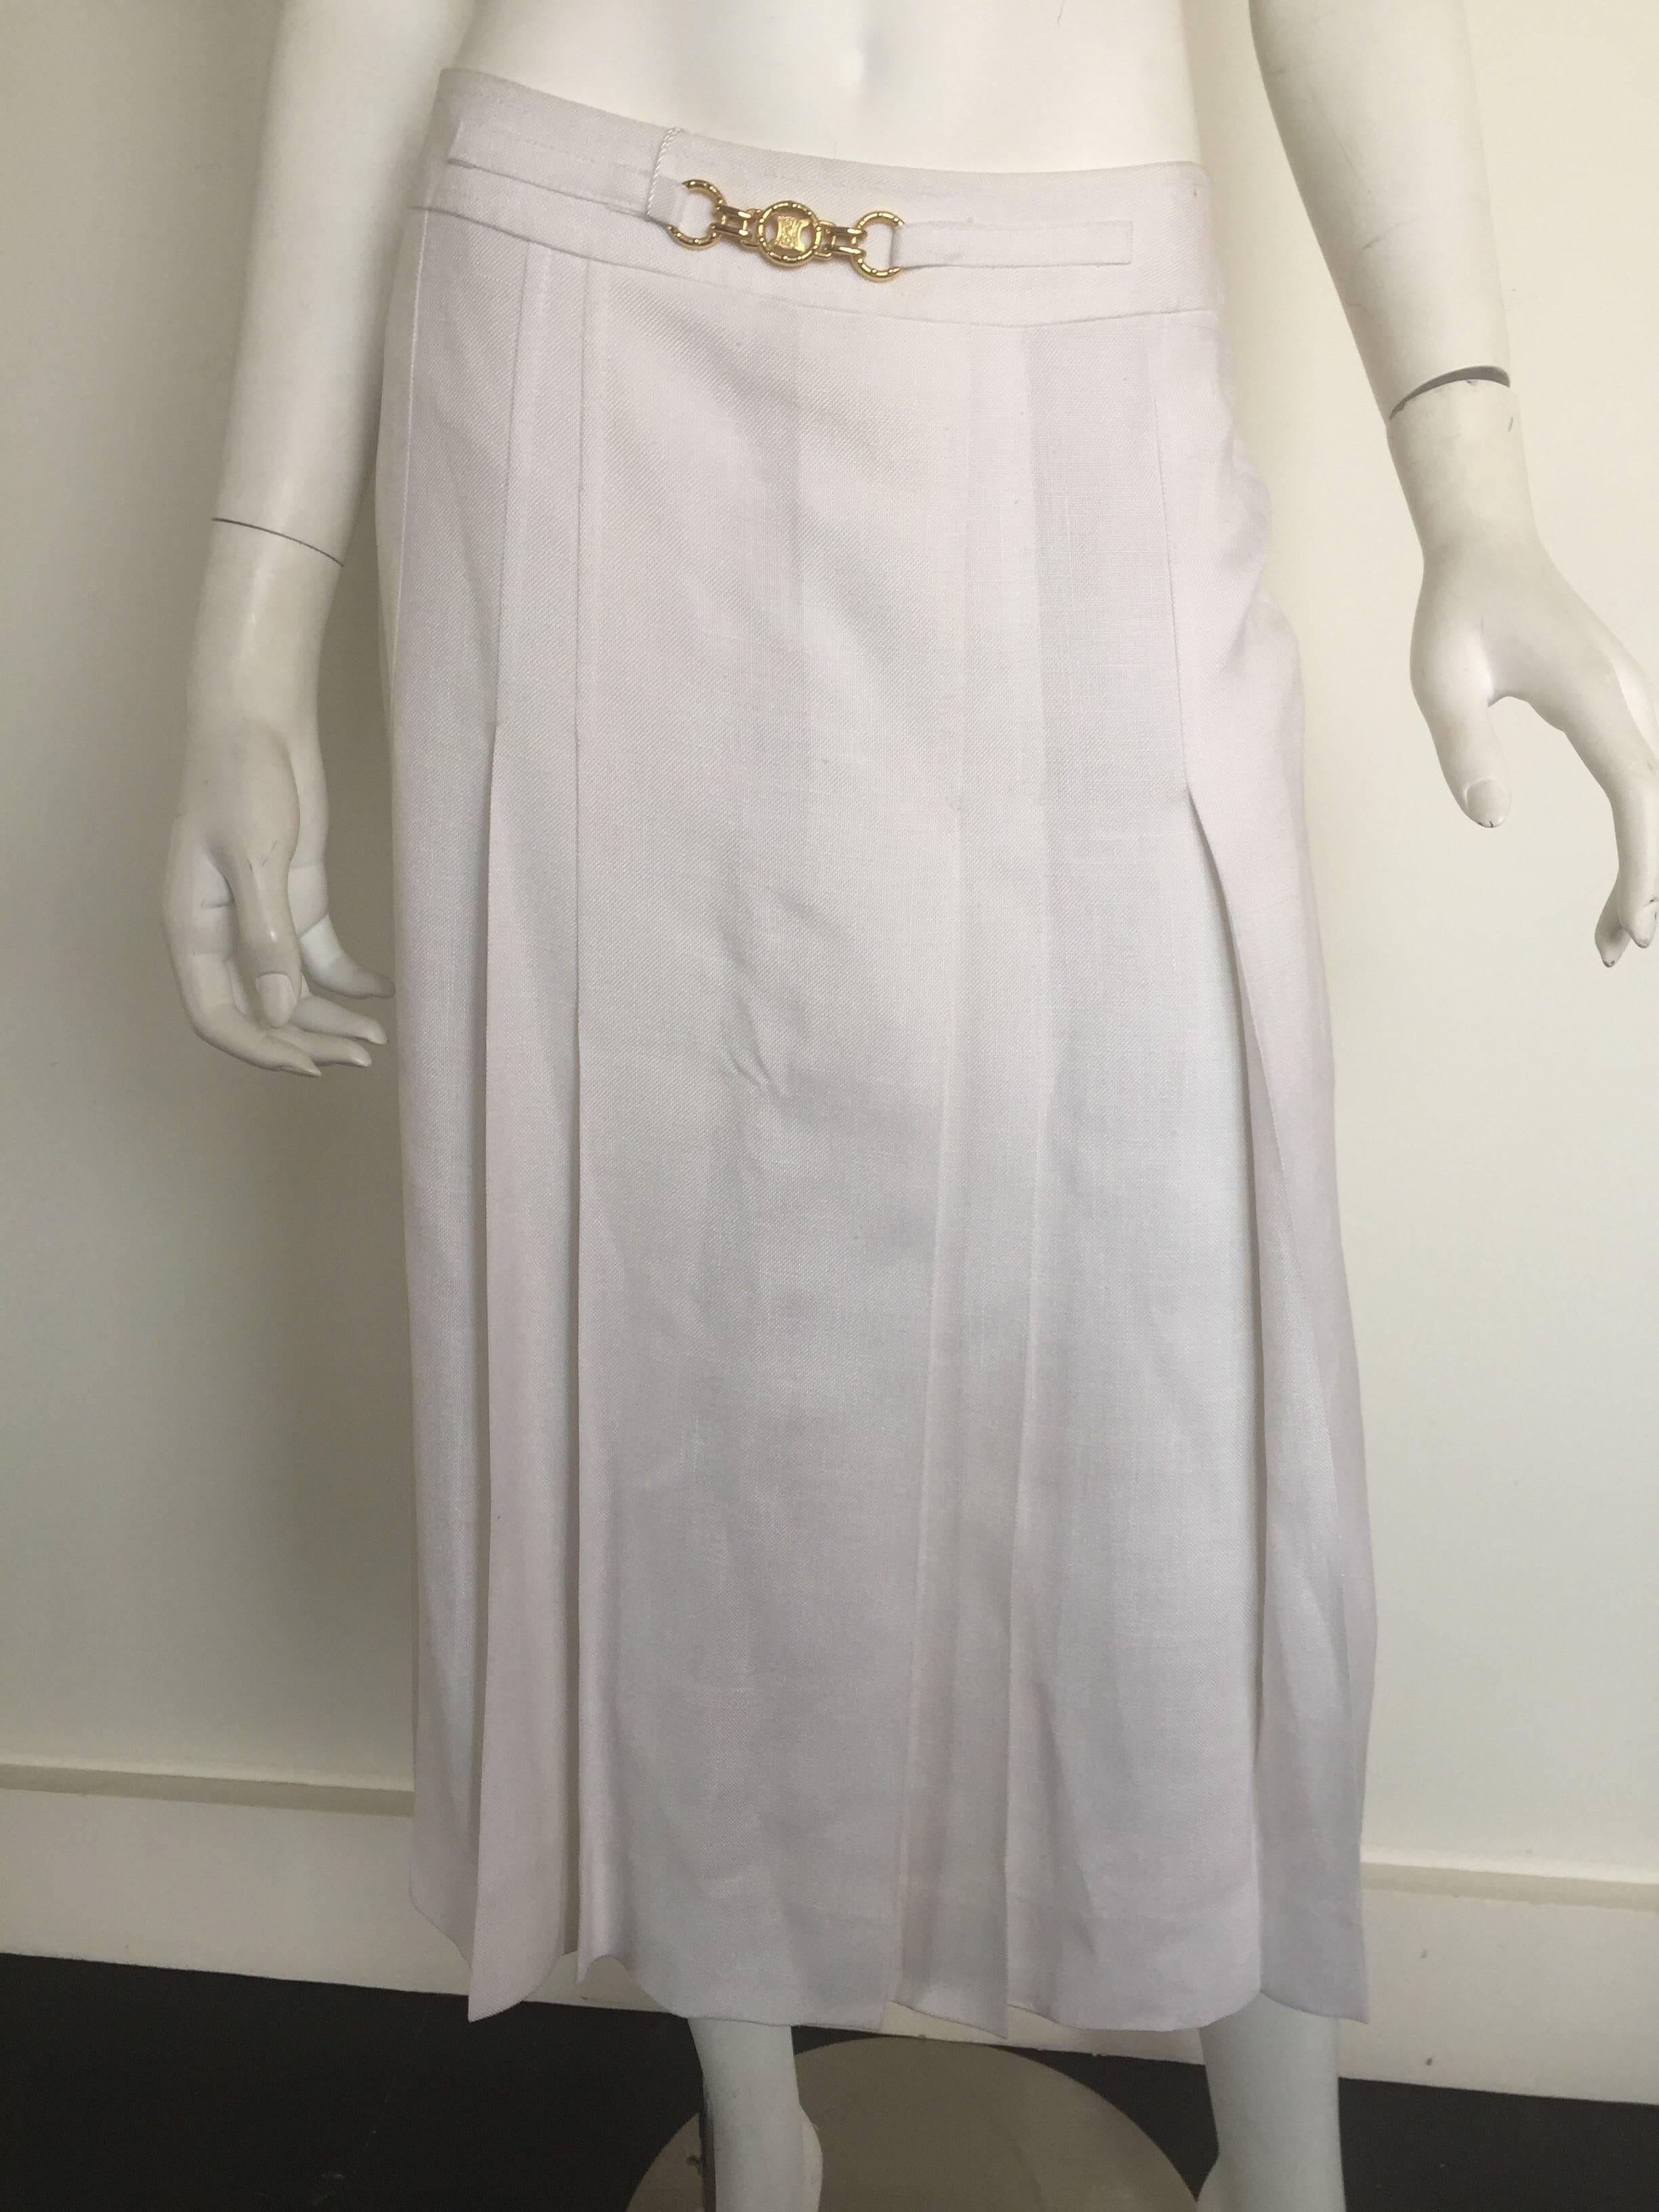 This 1970s Celine skirt has original tags and never worn.  It has two small rust dots most likely from hanger clips which could possible be removed and priced accordingly.  This skirt is linen with a Celine logo lining and gold Celine waist belt